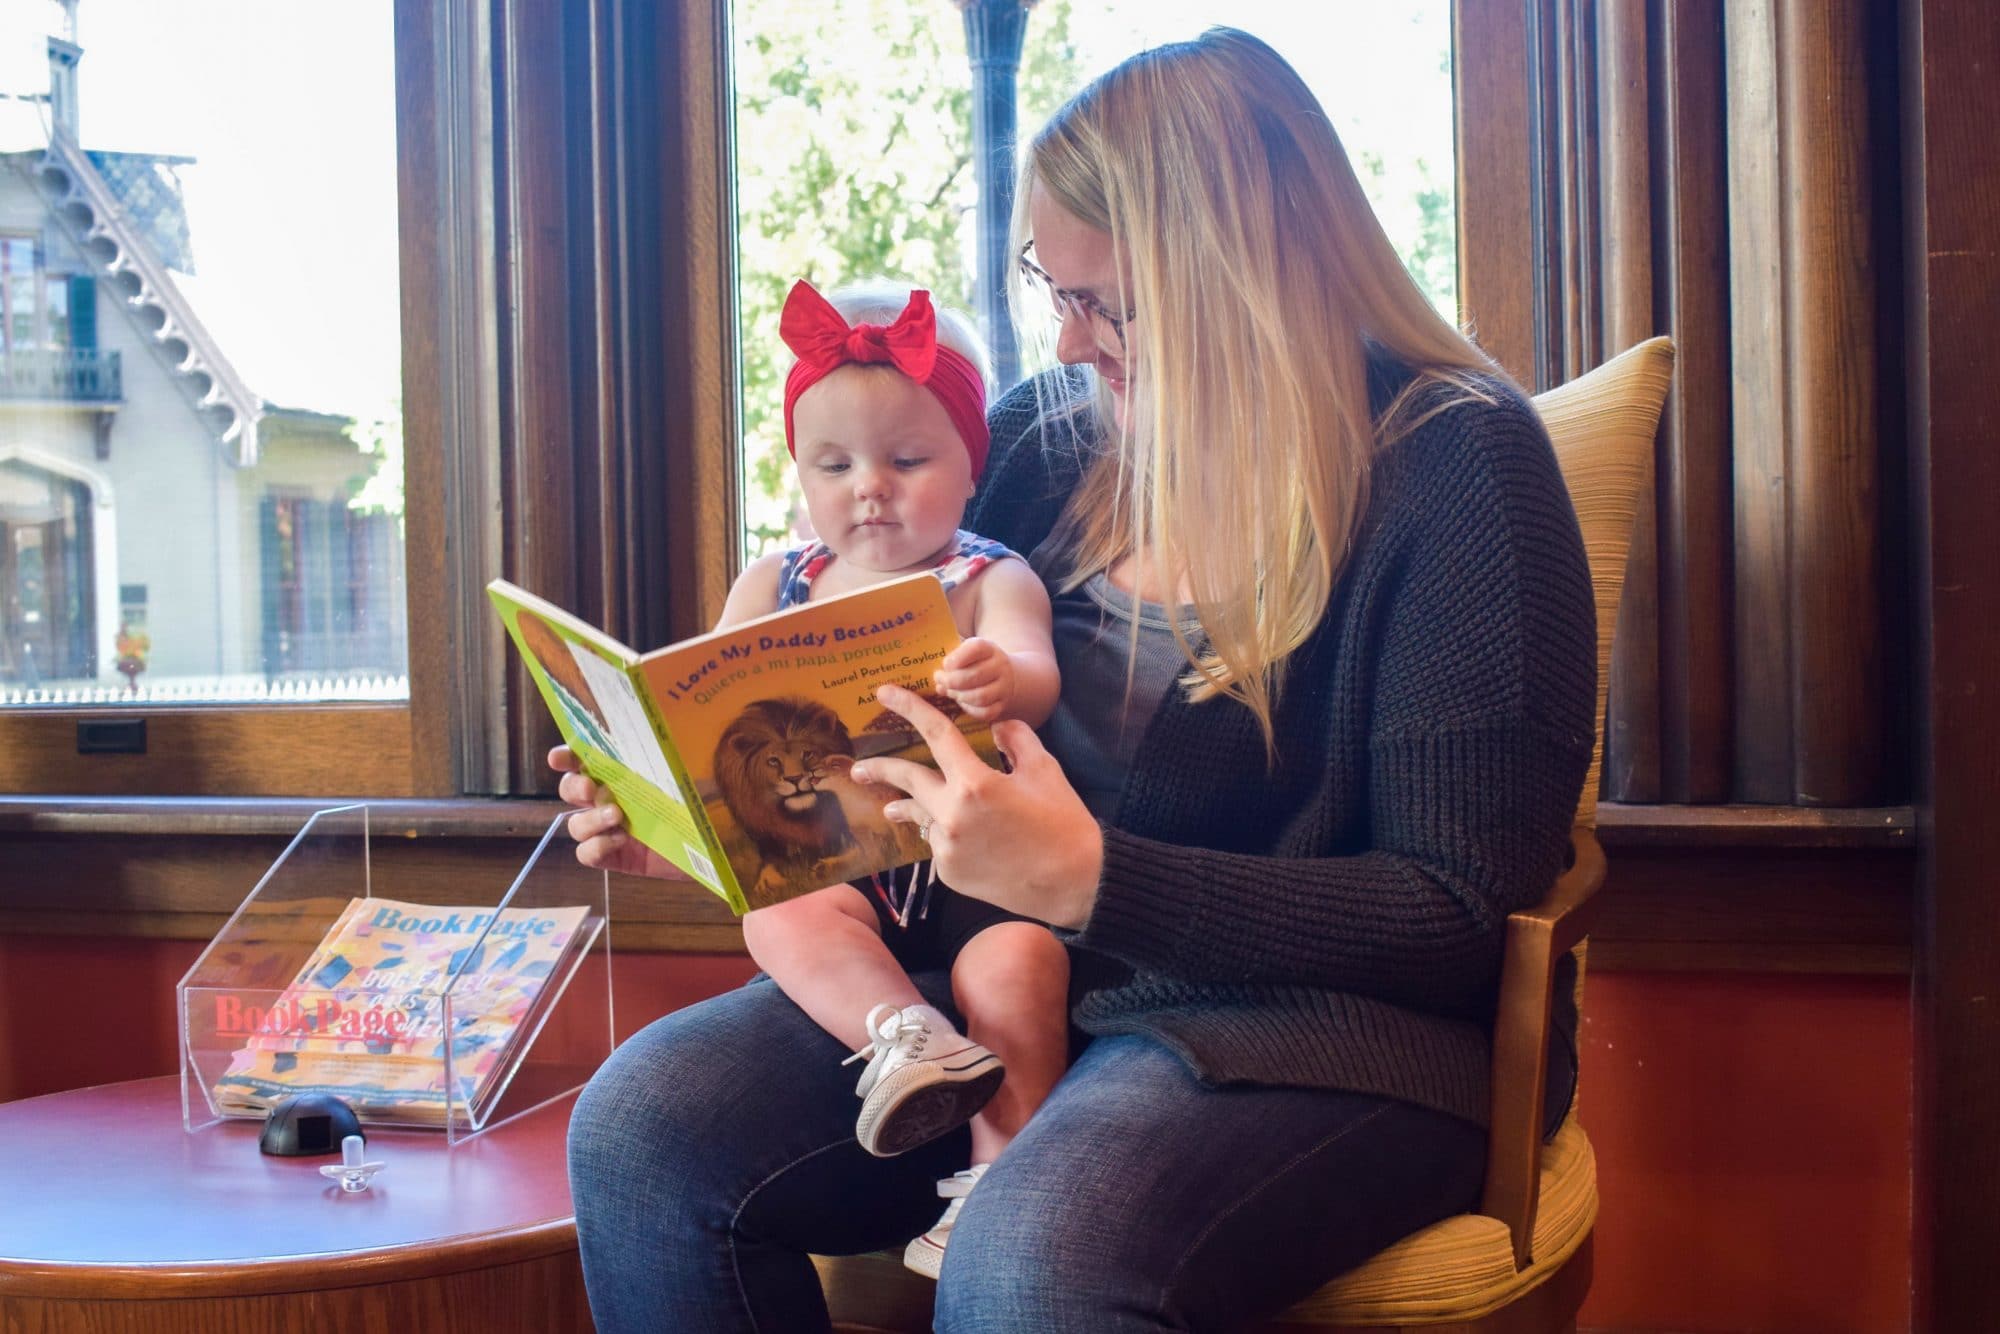 Woman reads a book to a baby sitting on her lap